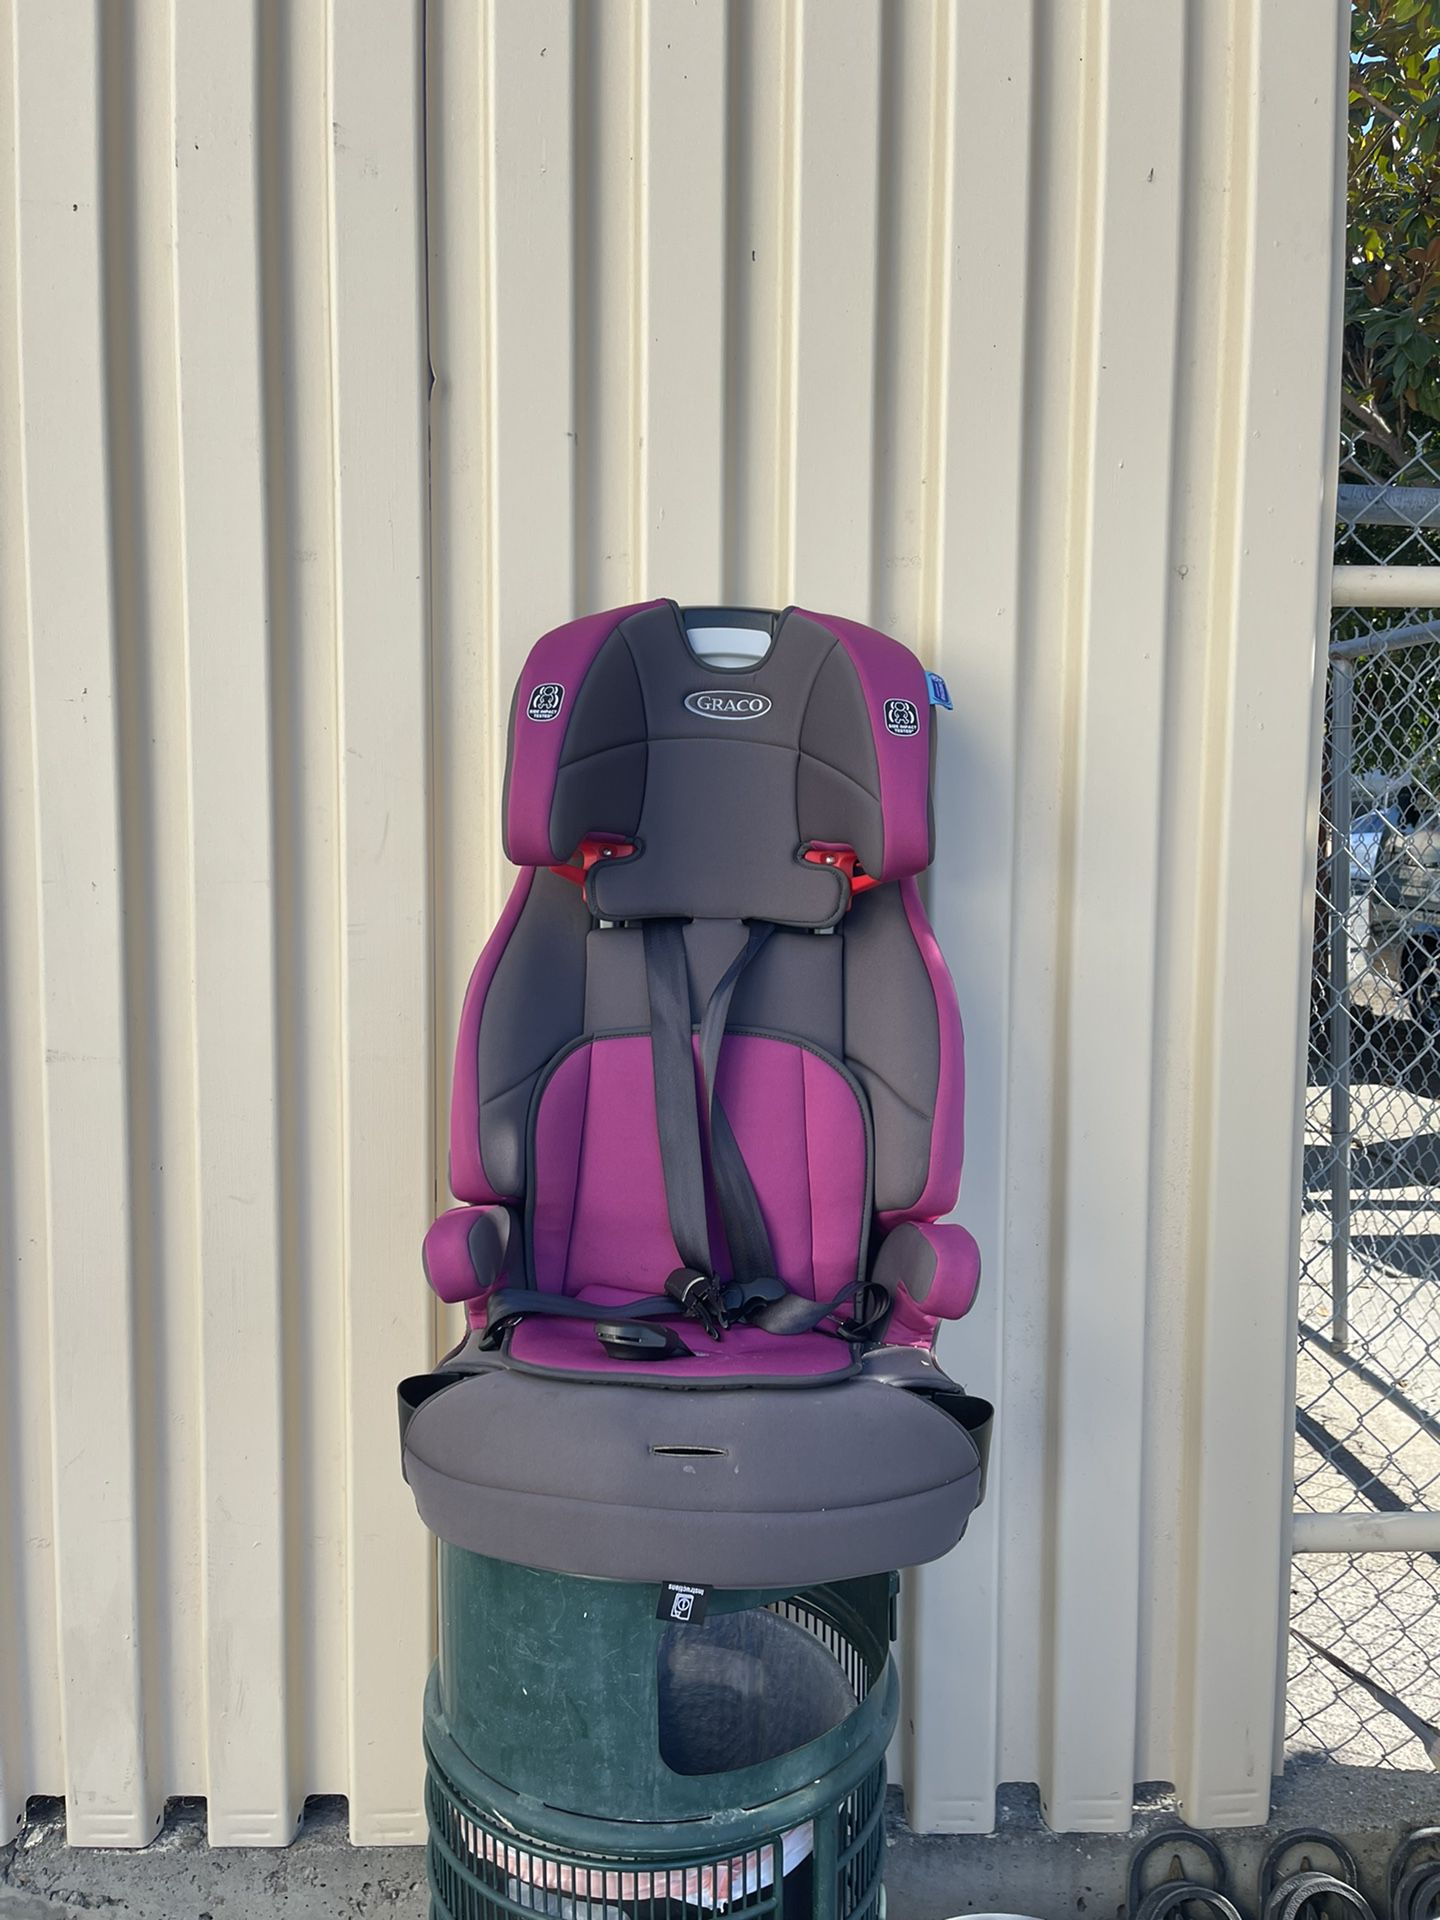 Graco Tranzitions 3in 1 Harness Booster Car Seat 